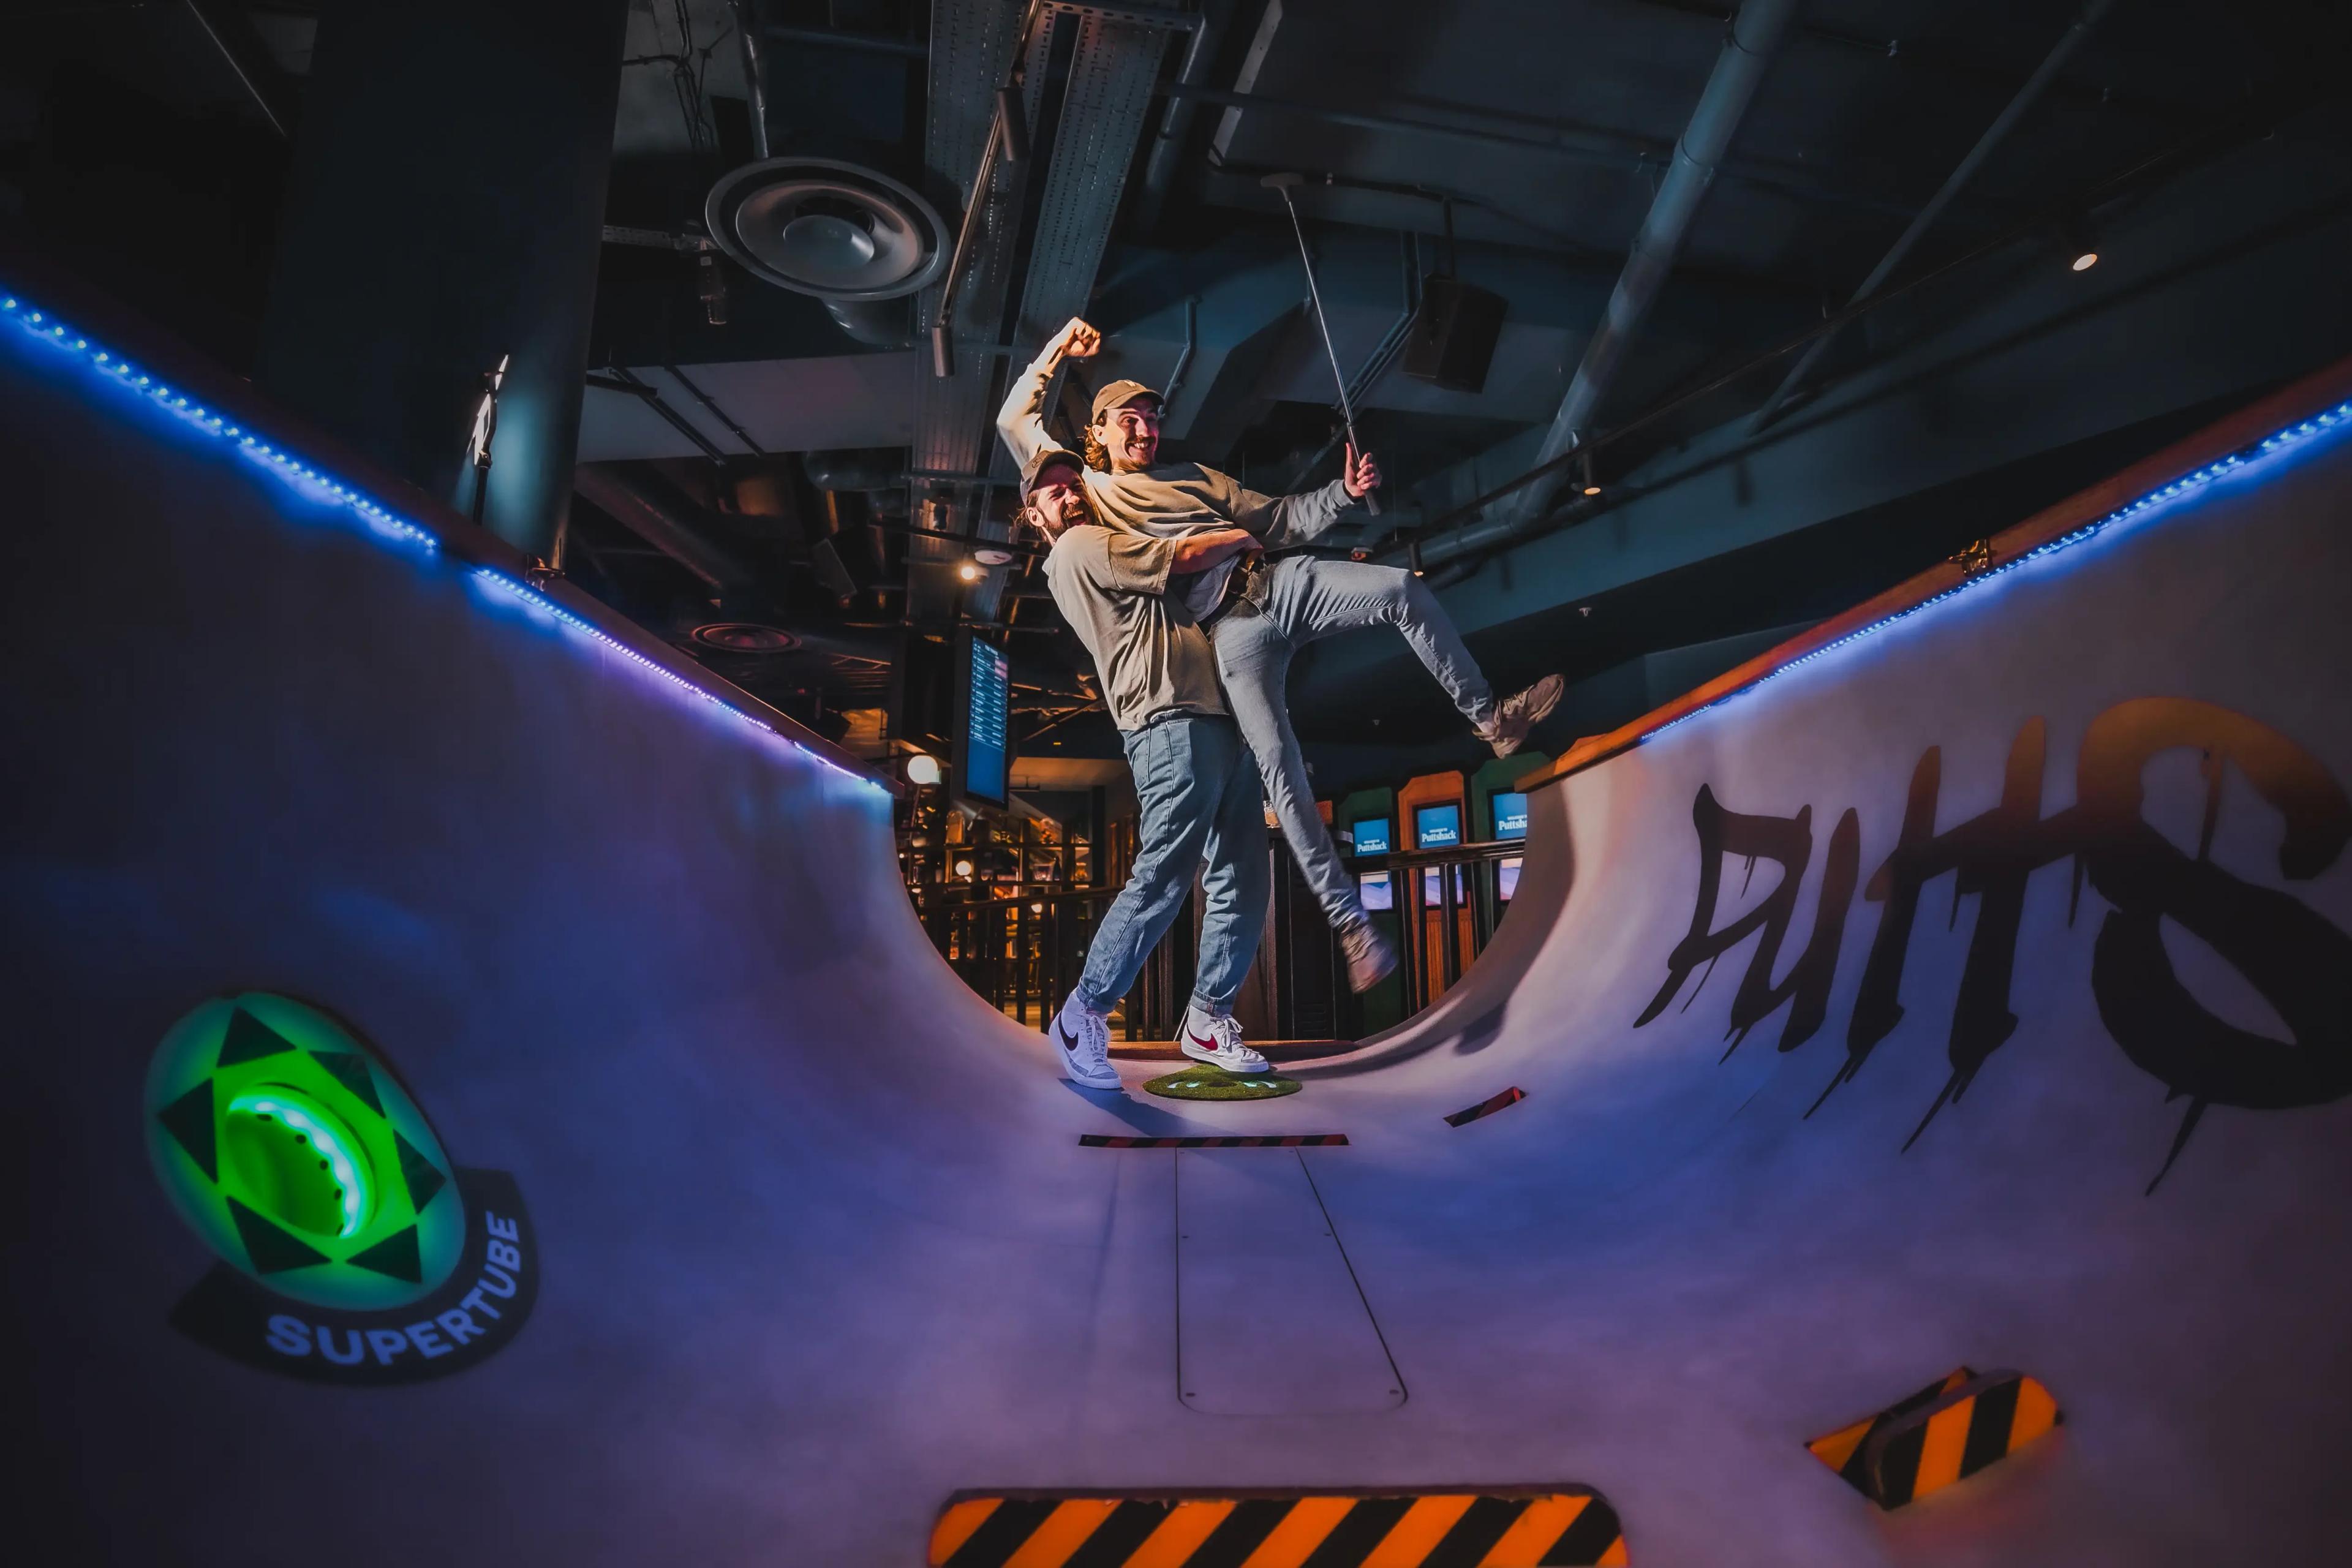 Two friends celebrating on the half-pipe skateboarding ramp hole at a Puttshack